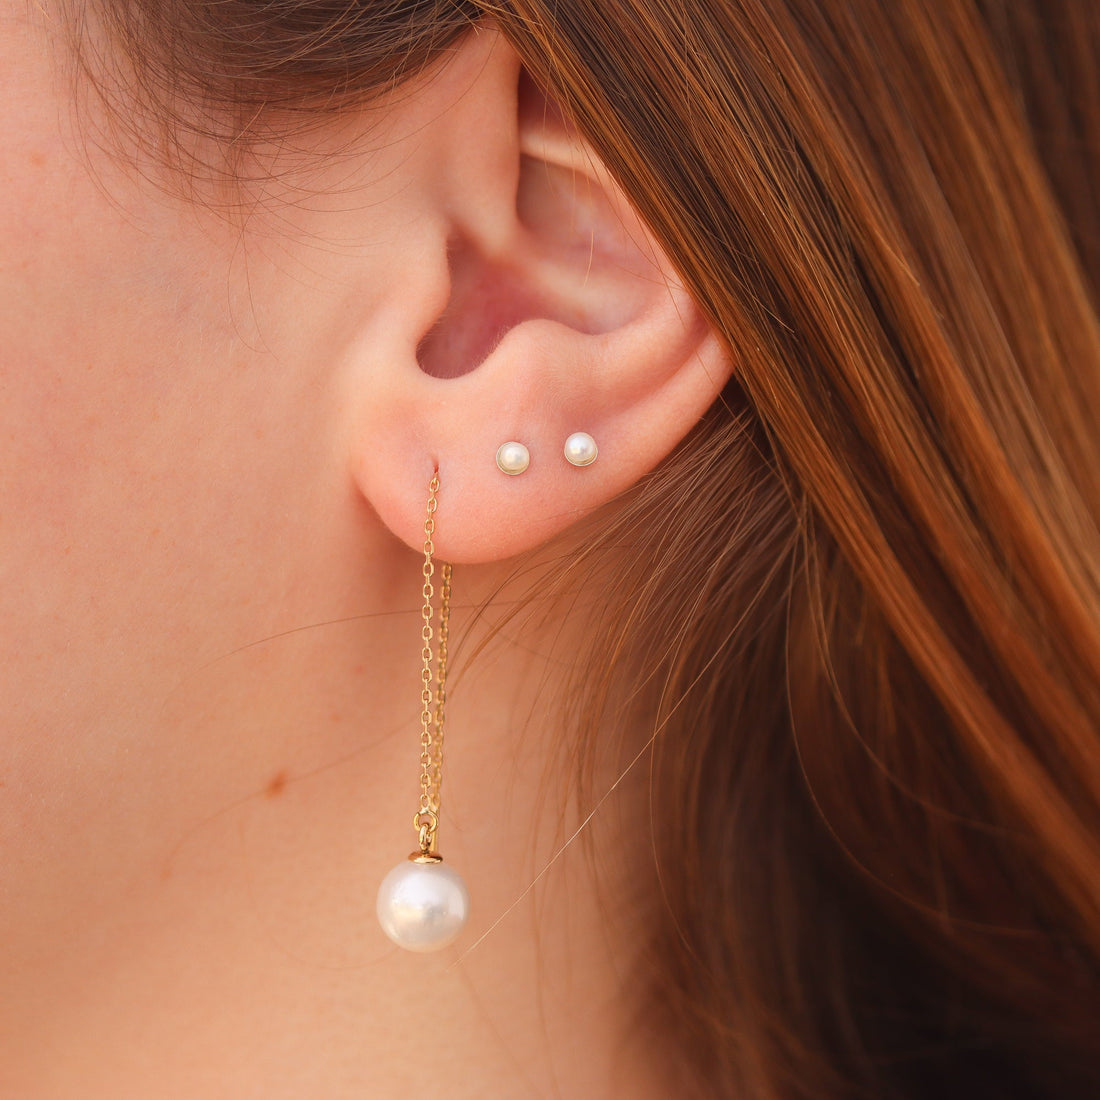 Large Pearl Threaders in 14K with Genuine Freshwater Pearls